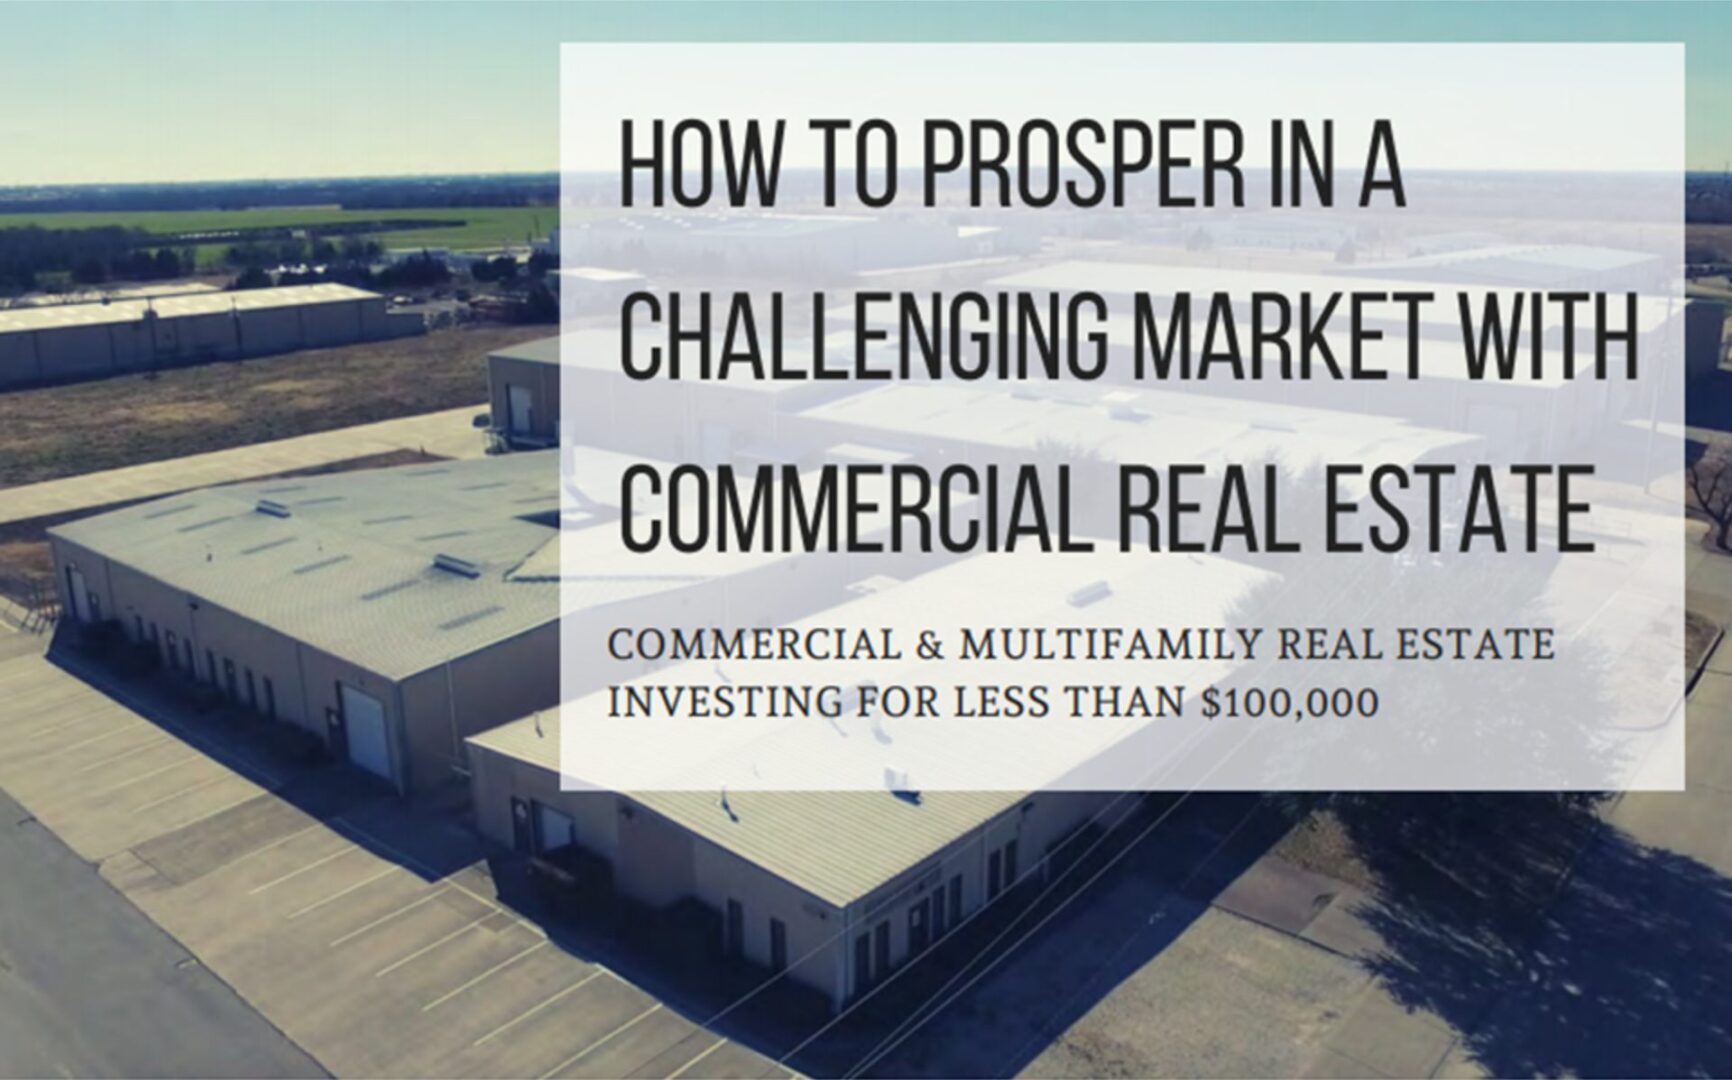 How to prosper in a challenging market with commercial real estate